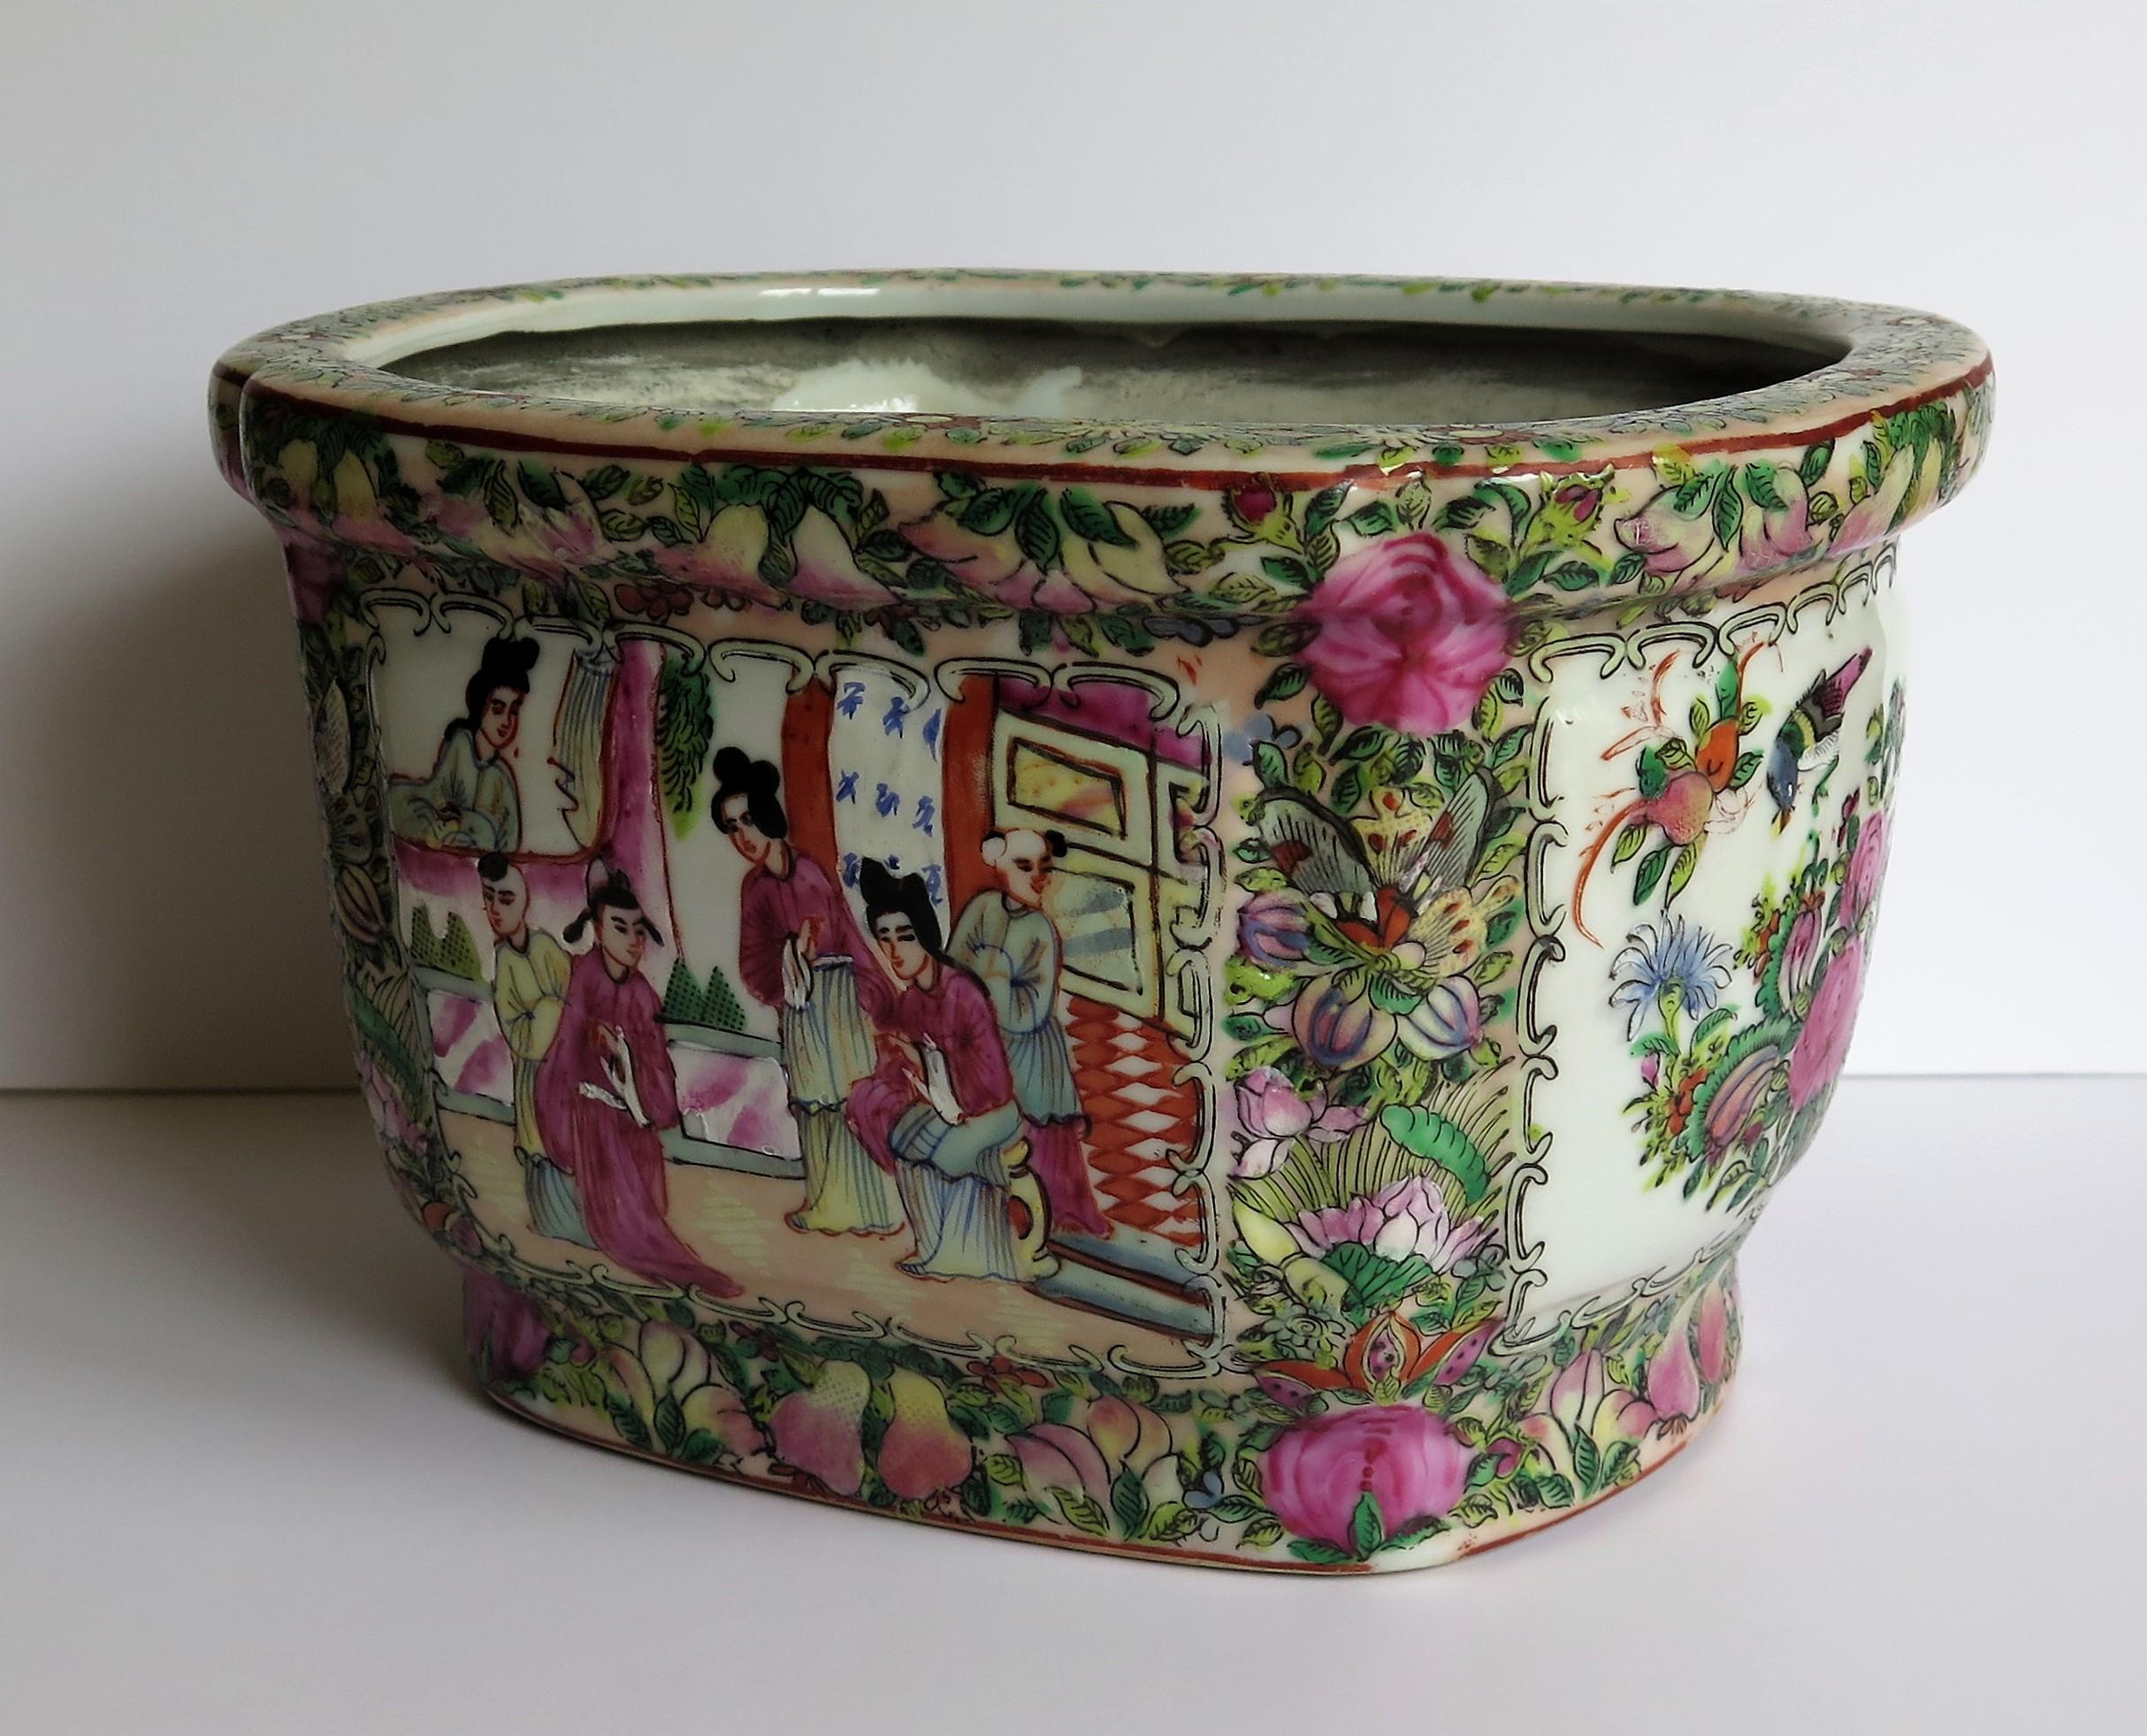 This is a very decorative ceramic Chinese export planter or jardinière in a rose medallion hand decorated pattern, dating to the late Qing period, circa 1900.

This piece is of a good useful size and has a lovely rectangular-oval shape, which is